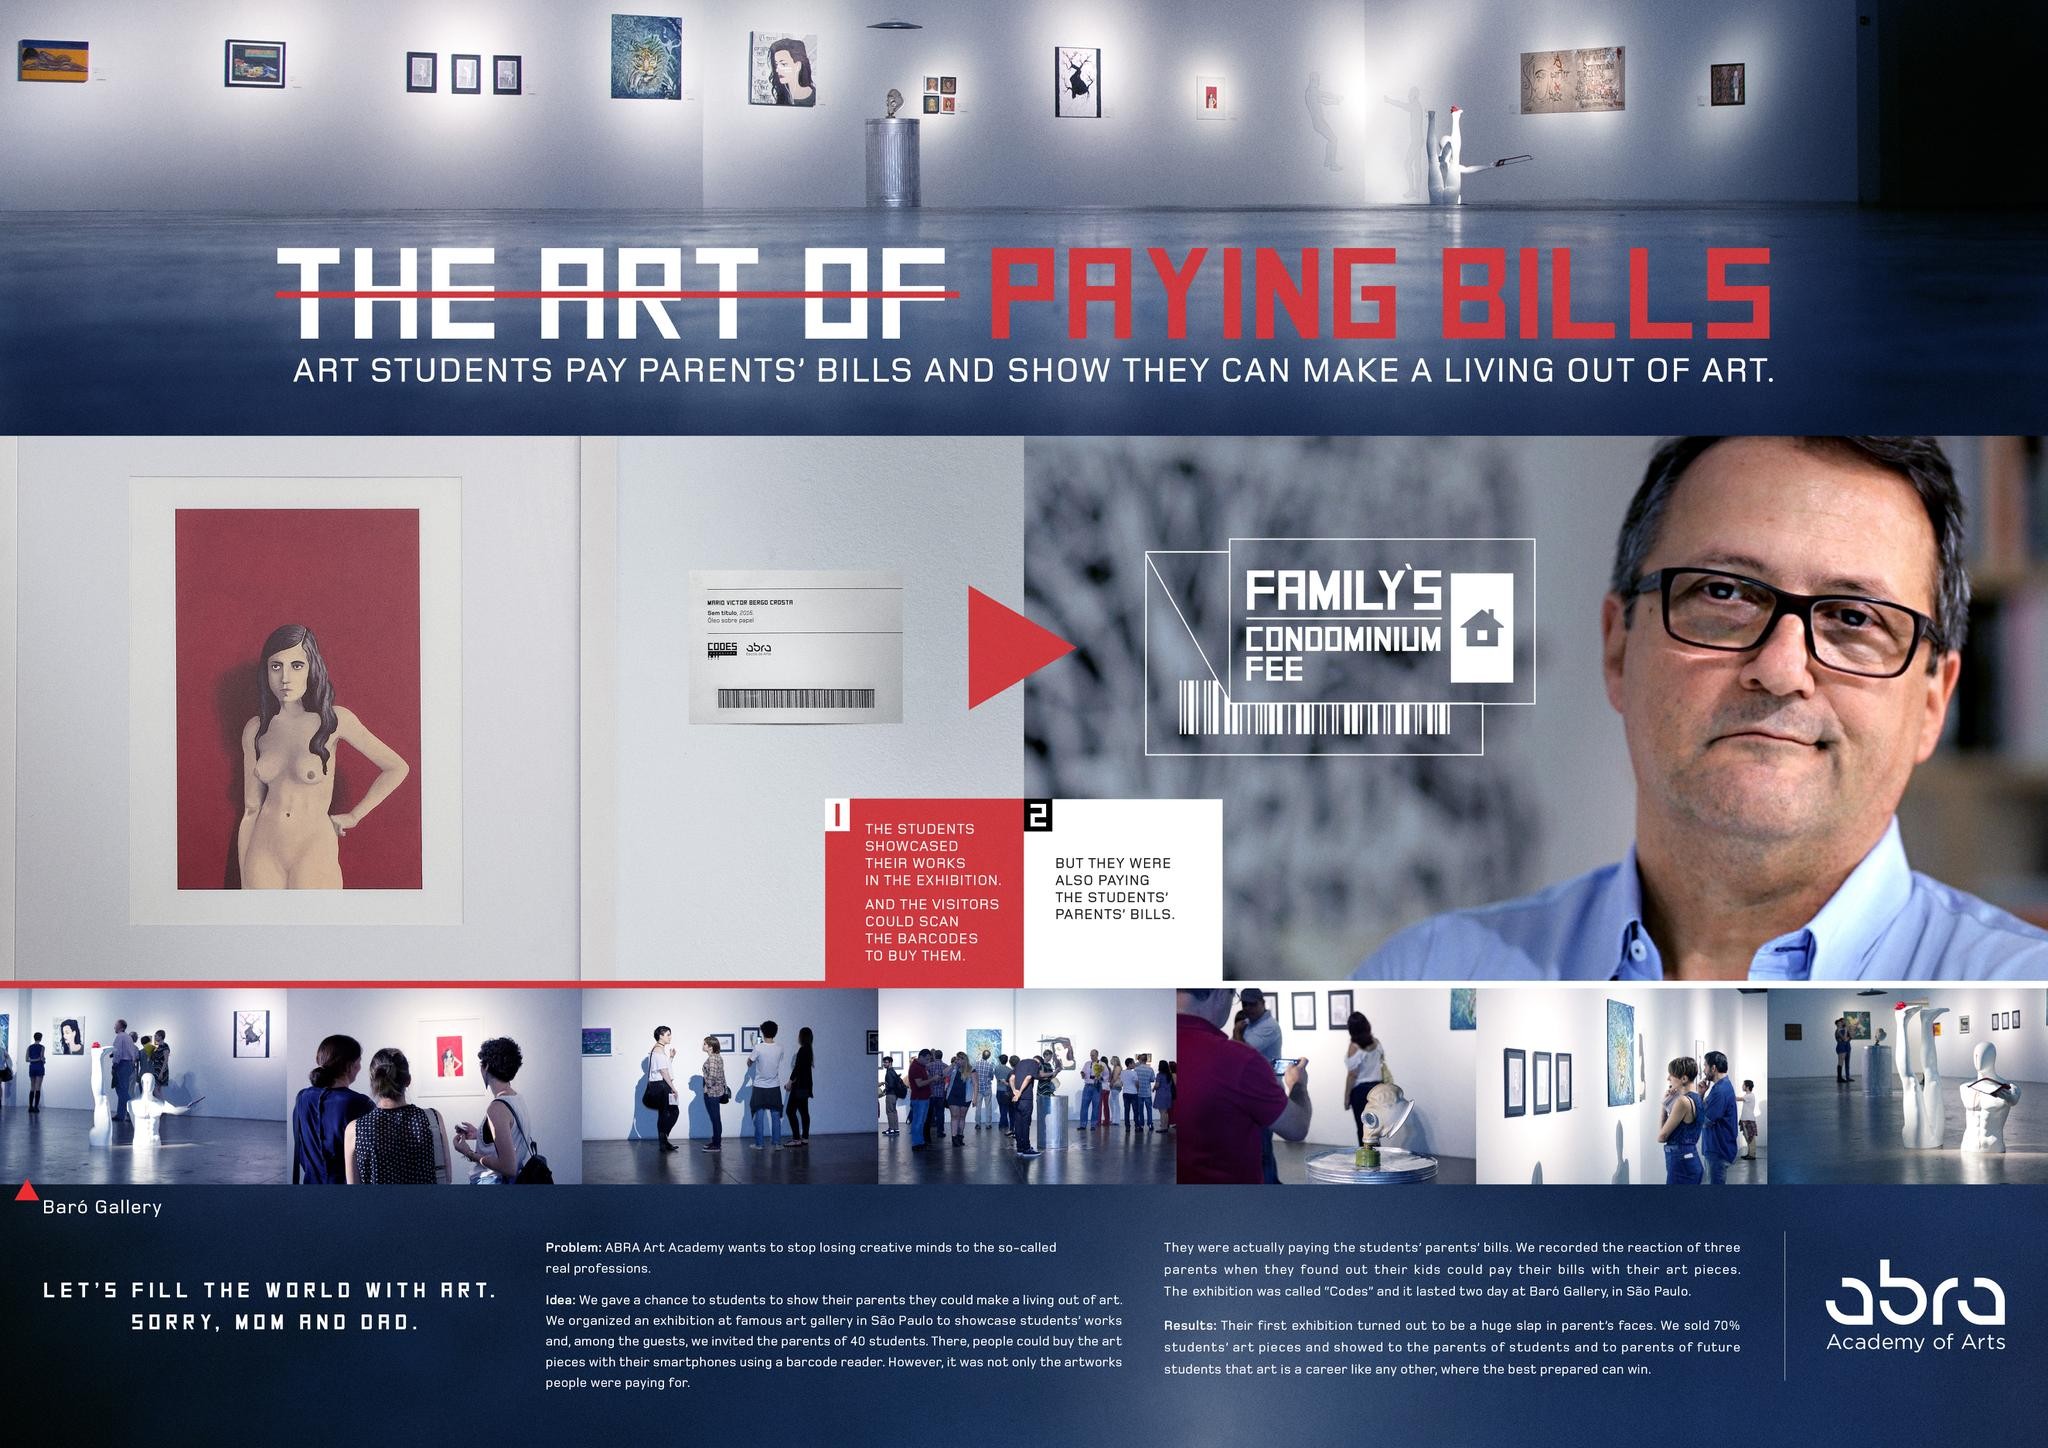 The Art of Paying Bills